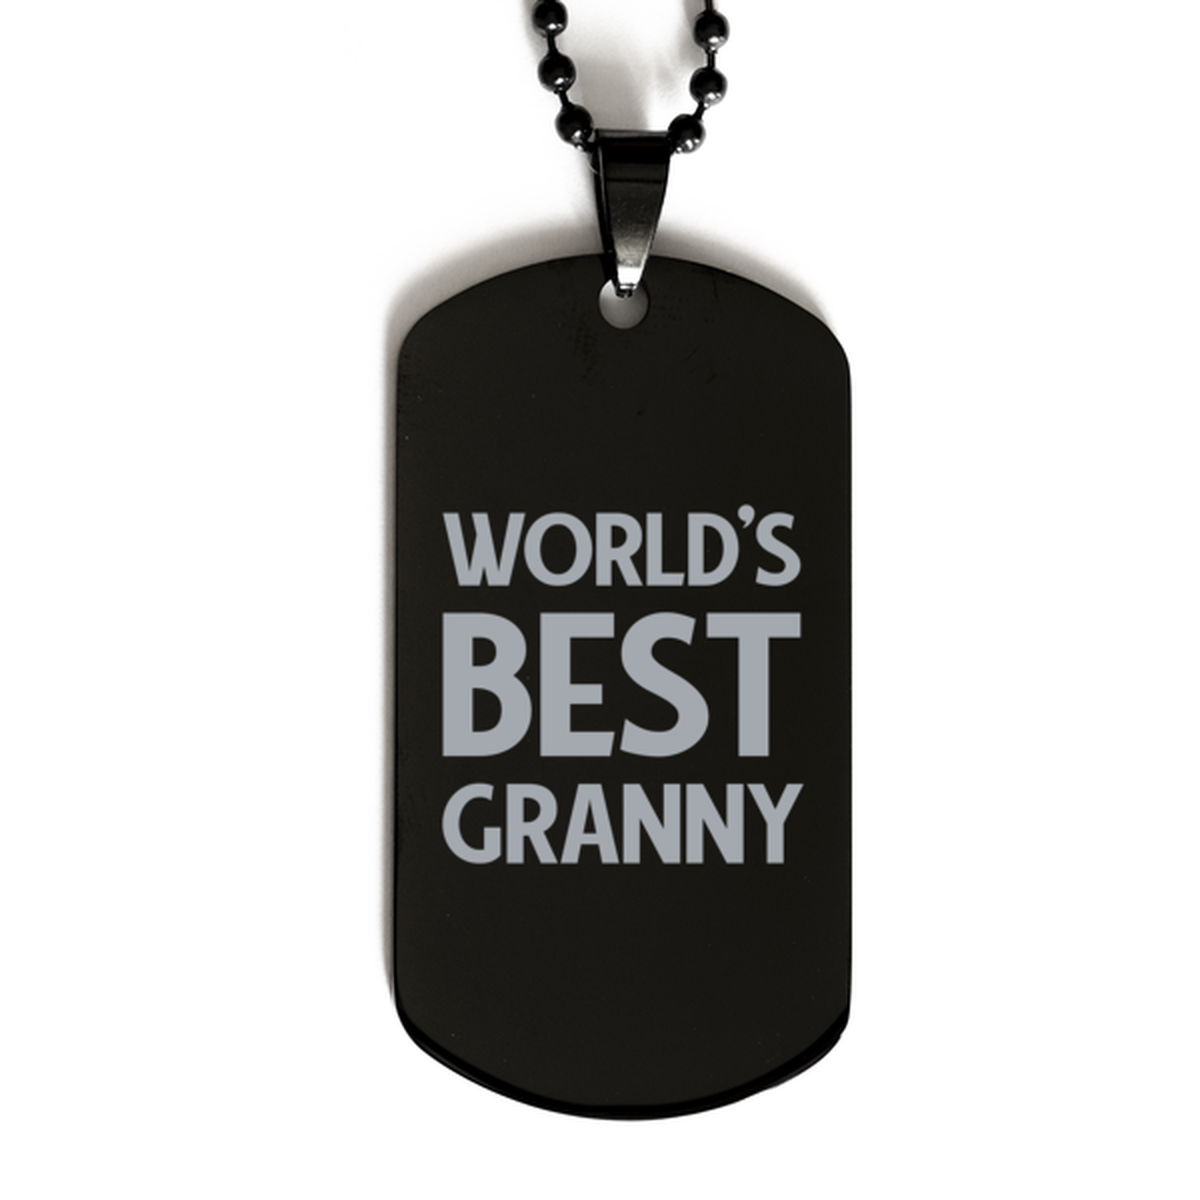 Worlds Best Granny Gifts, Funny Black Engraved Dog Tag For Granny, Birthday Presents For Women